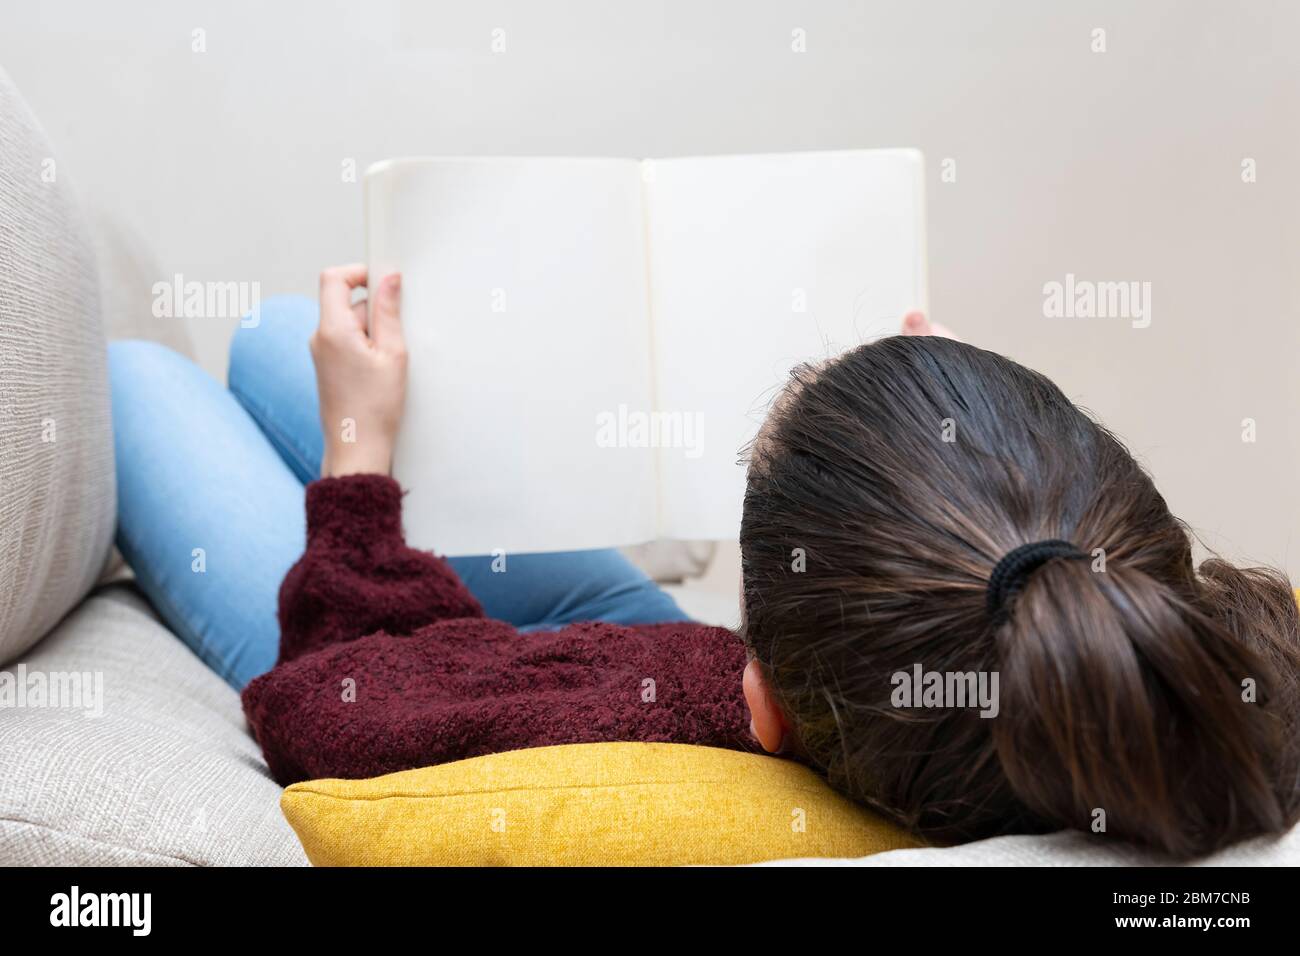 Girl with tied hair lying on a sofa with her head on a cushion reading a book Stock Photo